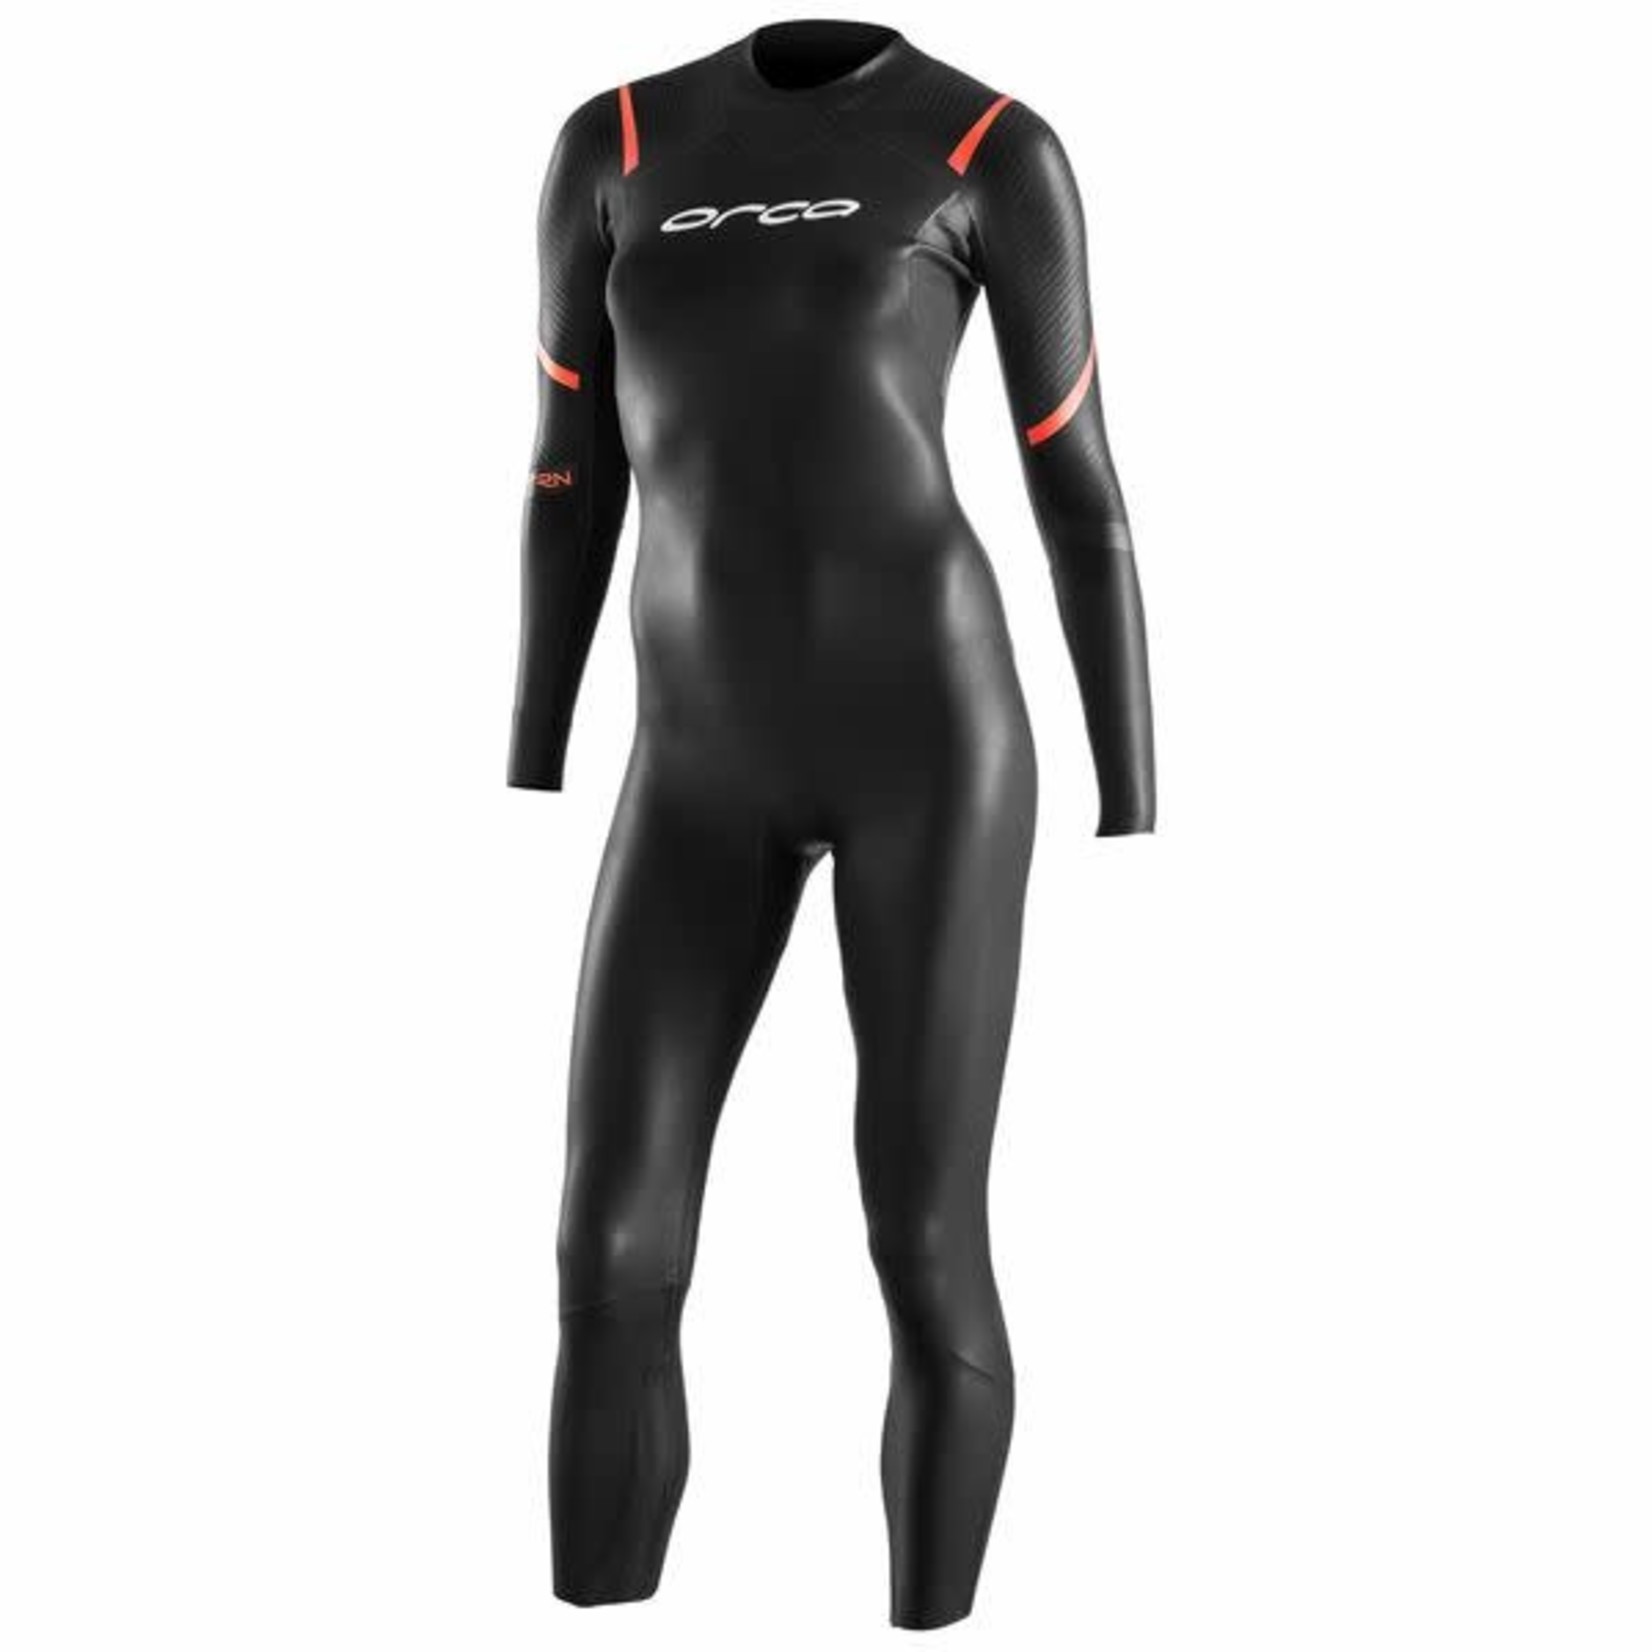 Orca Orca TRN openwater wetsuit